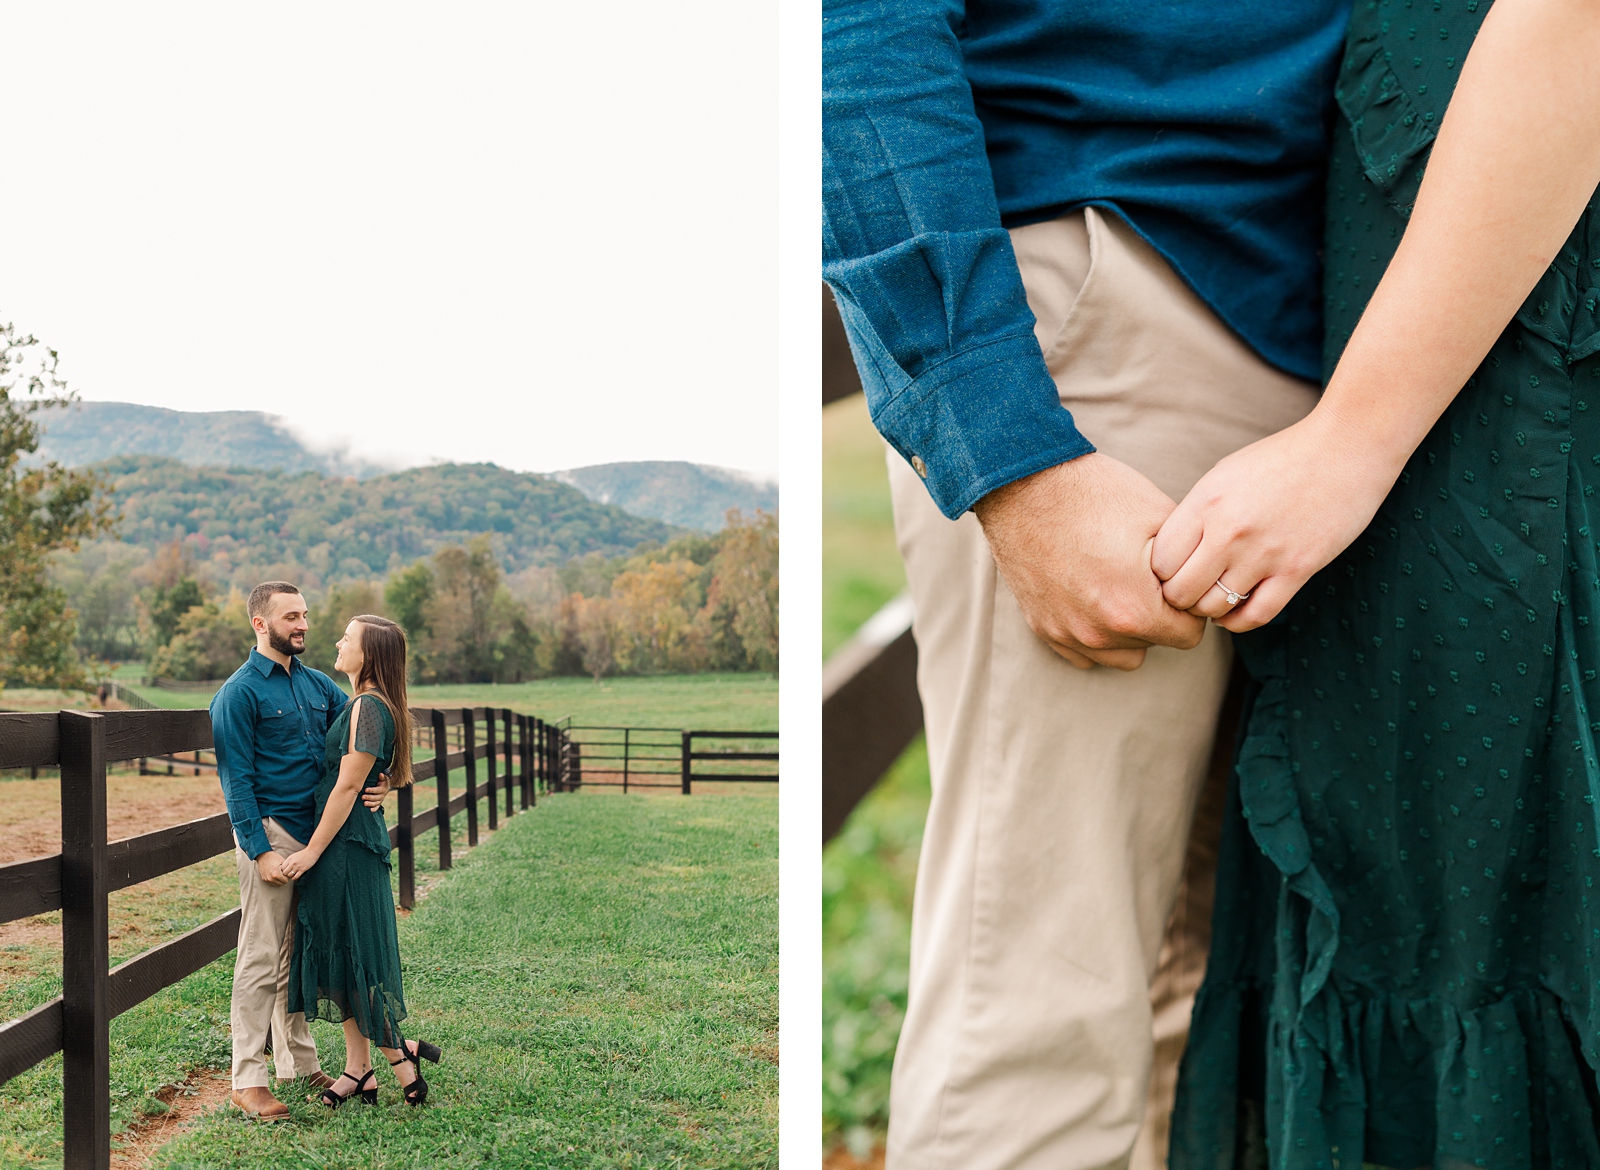 Virginia Engagement Session Locations with Mountain Views. Virginia Wedding Photographer Kailey Brianne Photography 